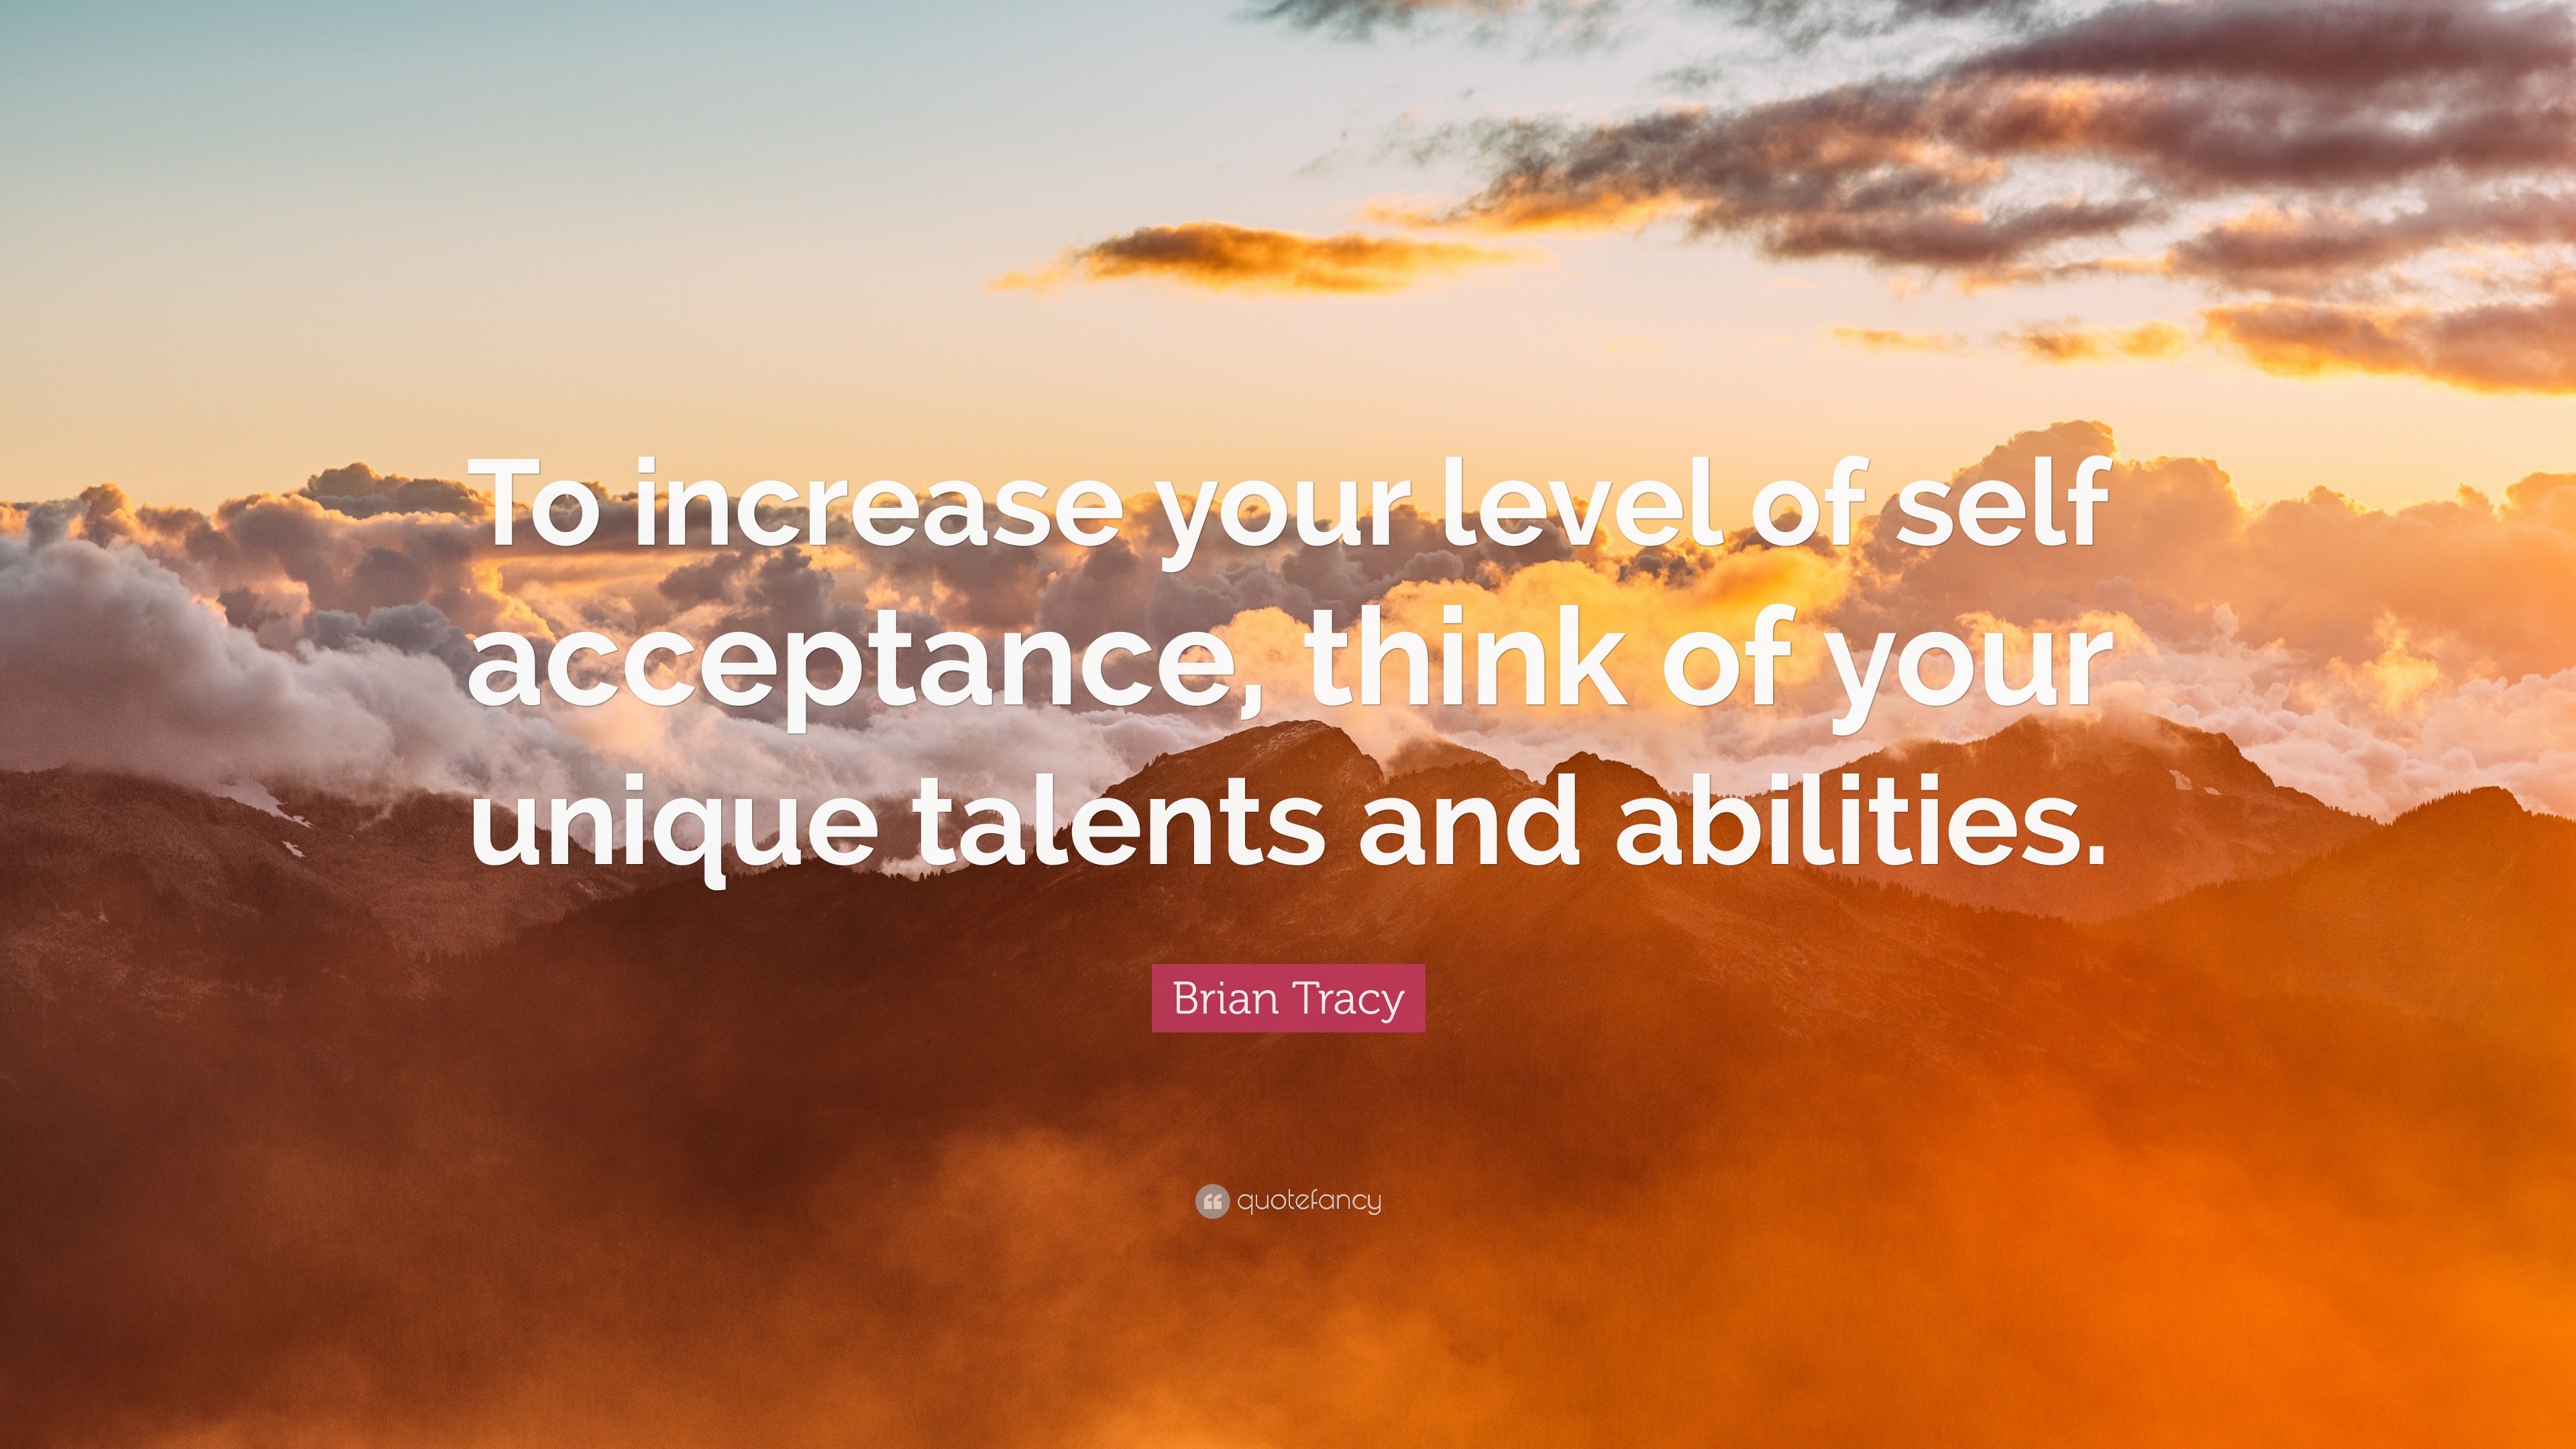 Brian Tracy Quote: “To increase your level of self acceptance, think of ...